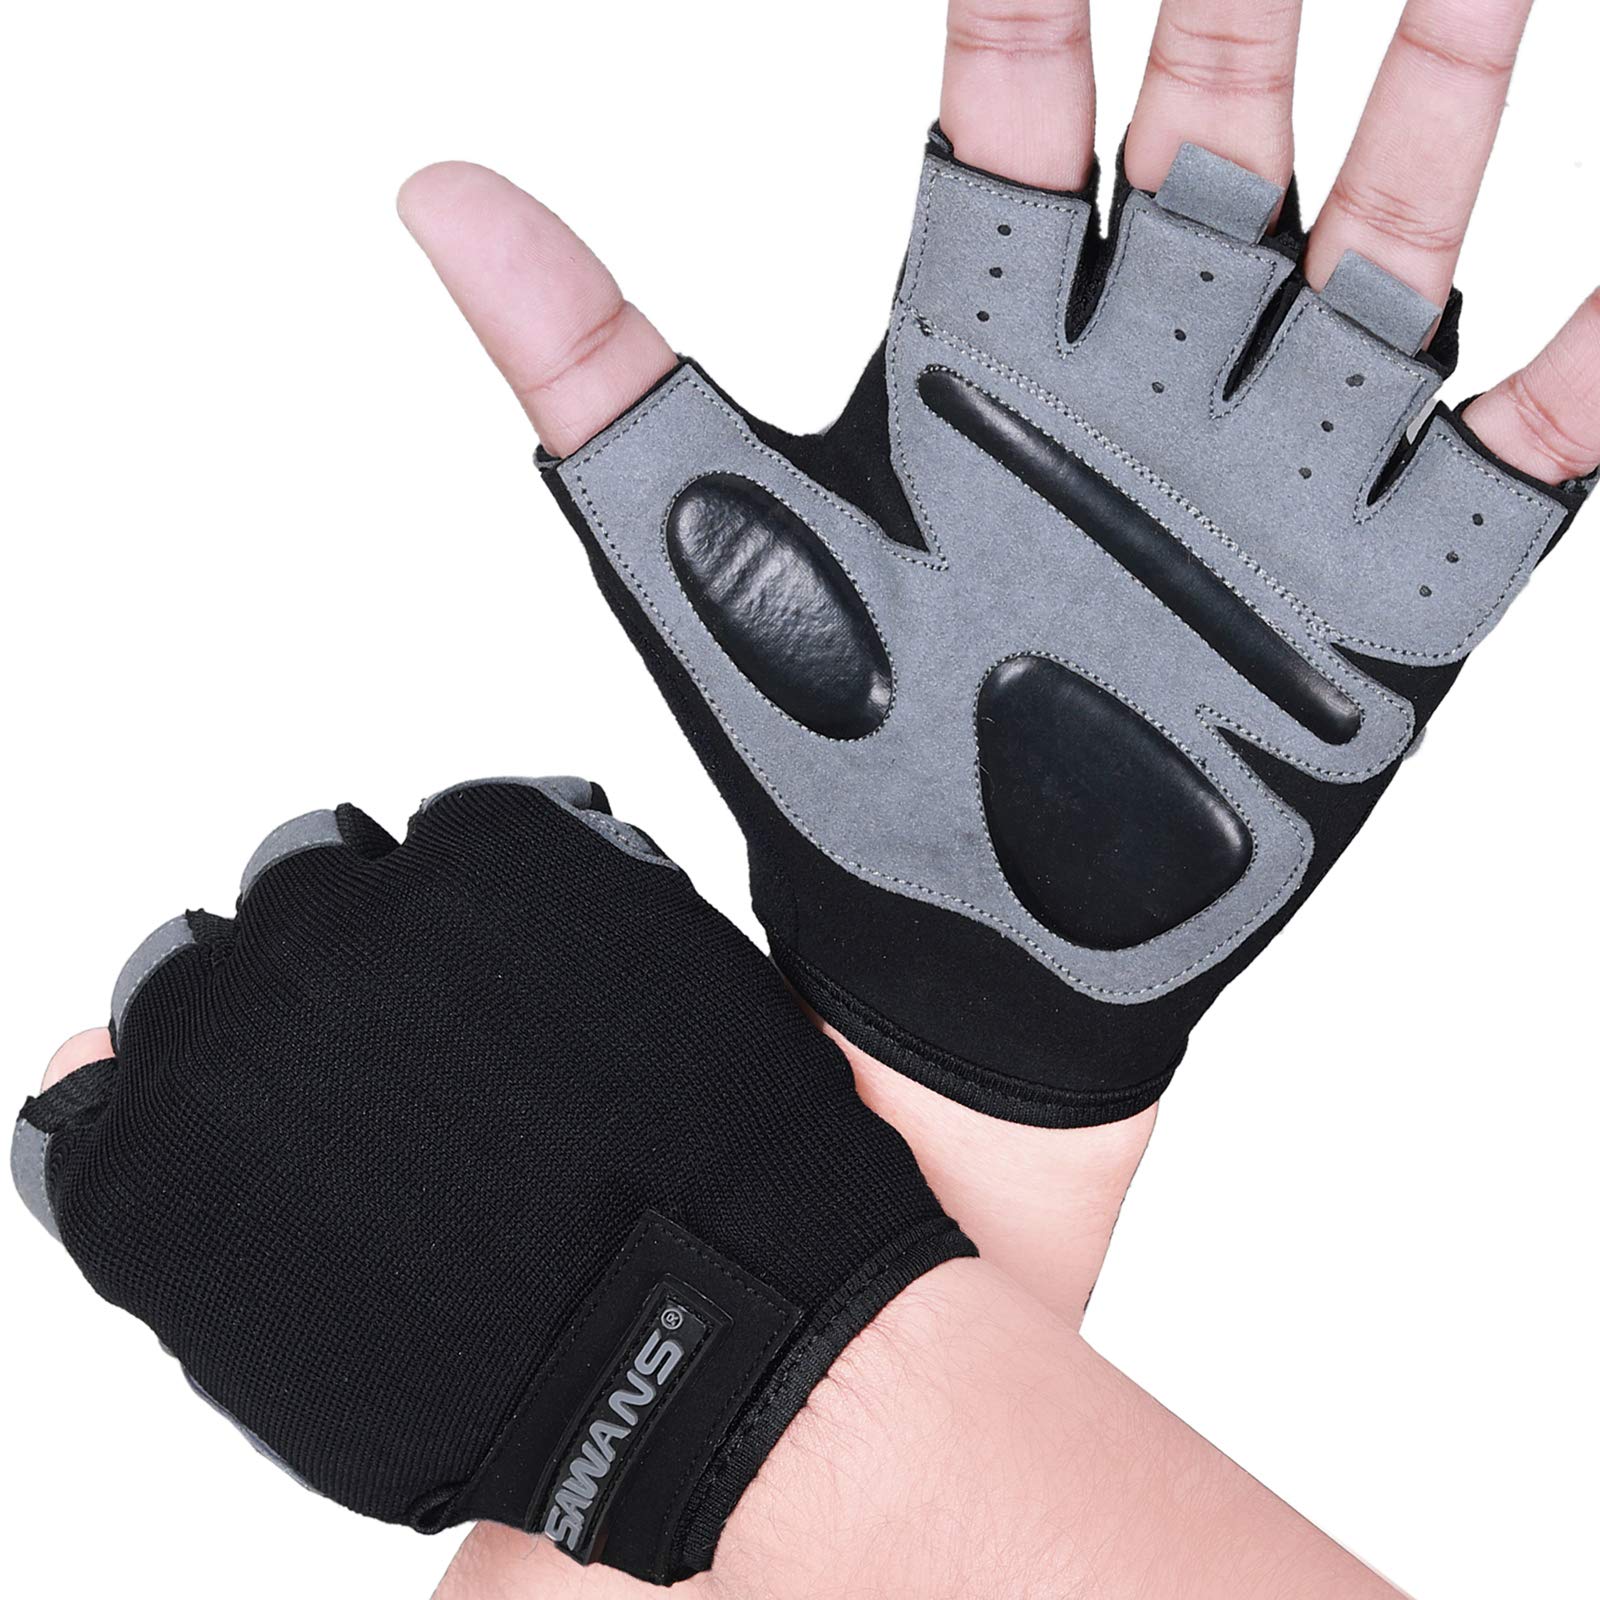 SAWANS Fitness Workout Gloves Gym Weight Lifting Gloves for Men Women  Breathable Gymnasium Wrist Support Padded Deadlifts Exercise Training Pull  Ups